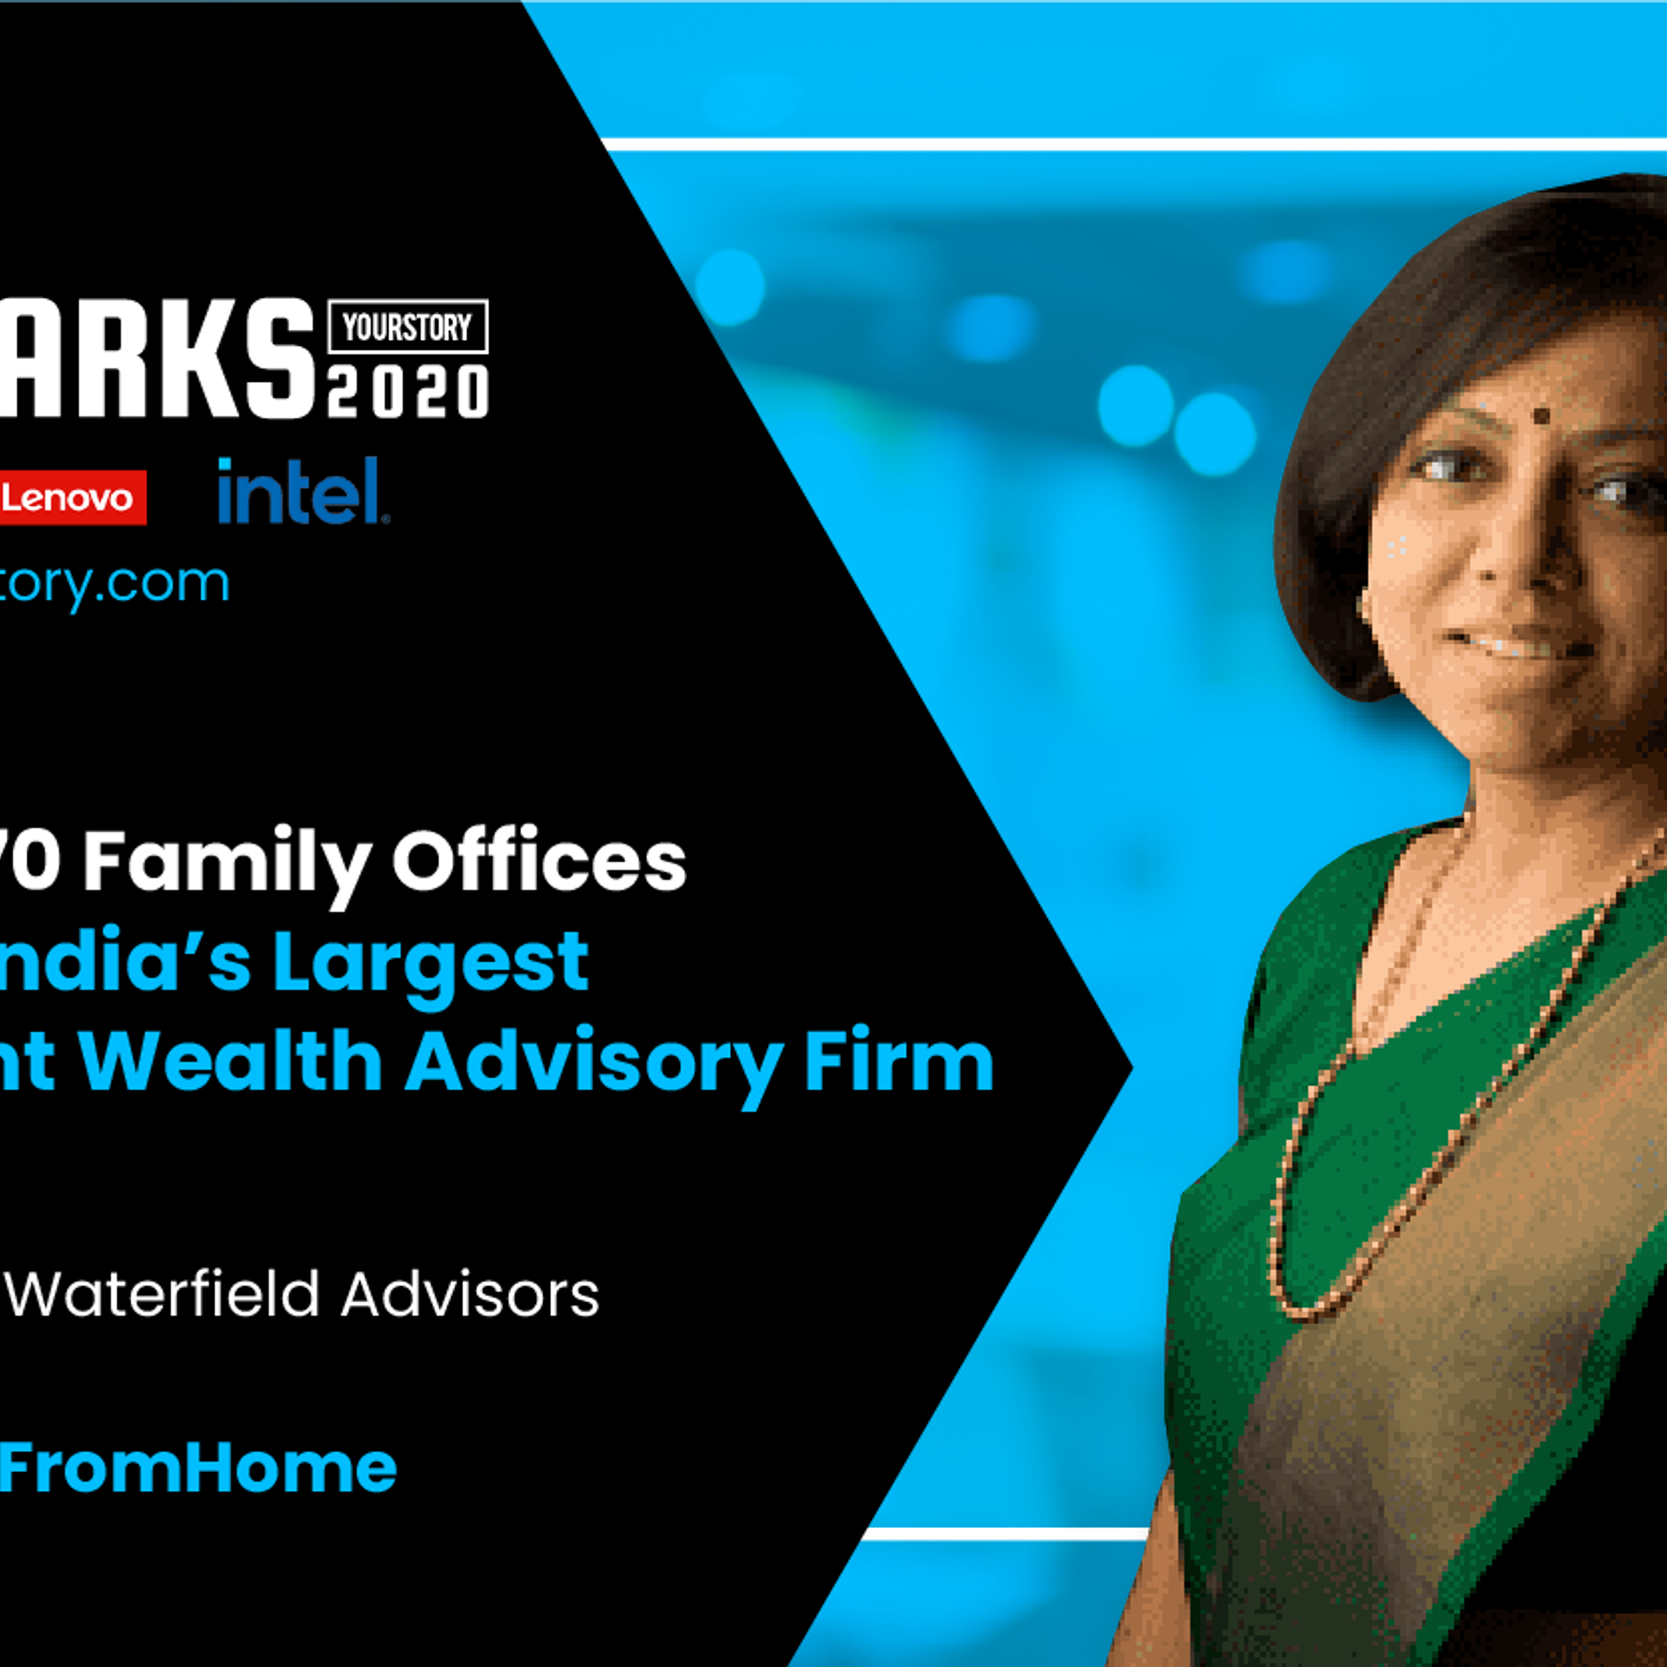 [TechSparks 2020] Soumya Rajan of Waterfield Advisors on guiding Indian family offices to sustainable wealth creation